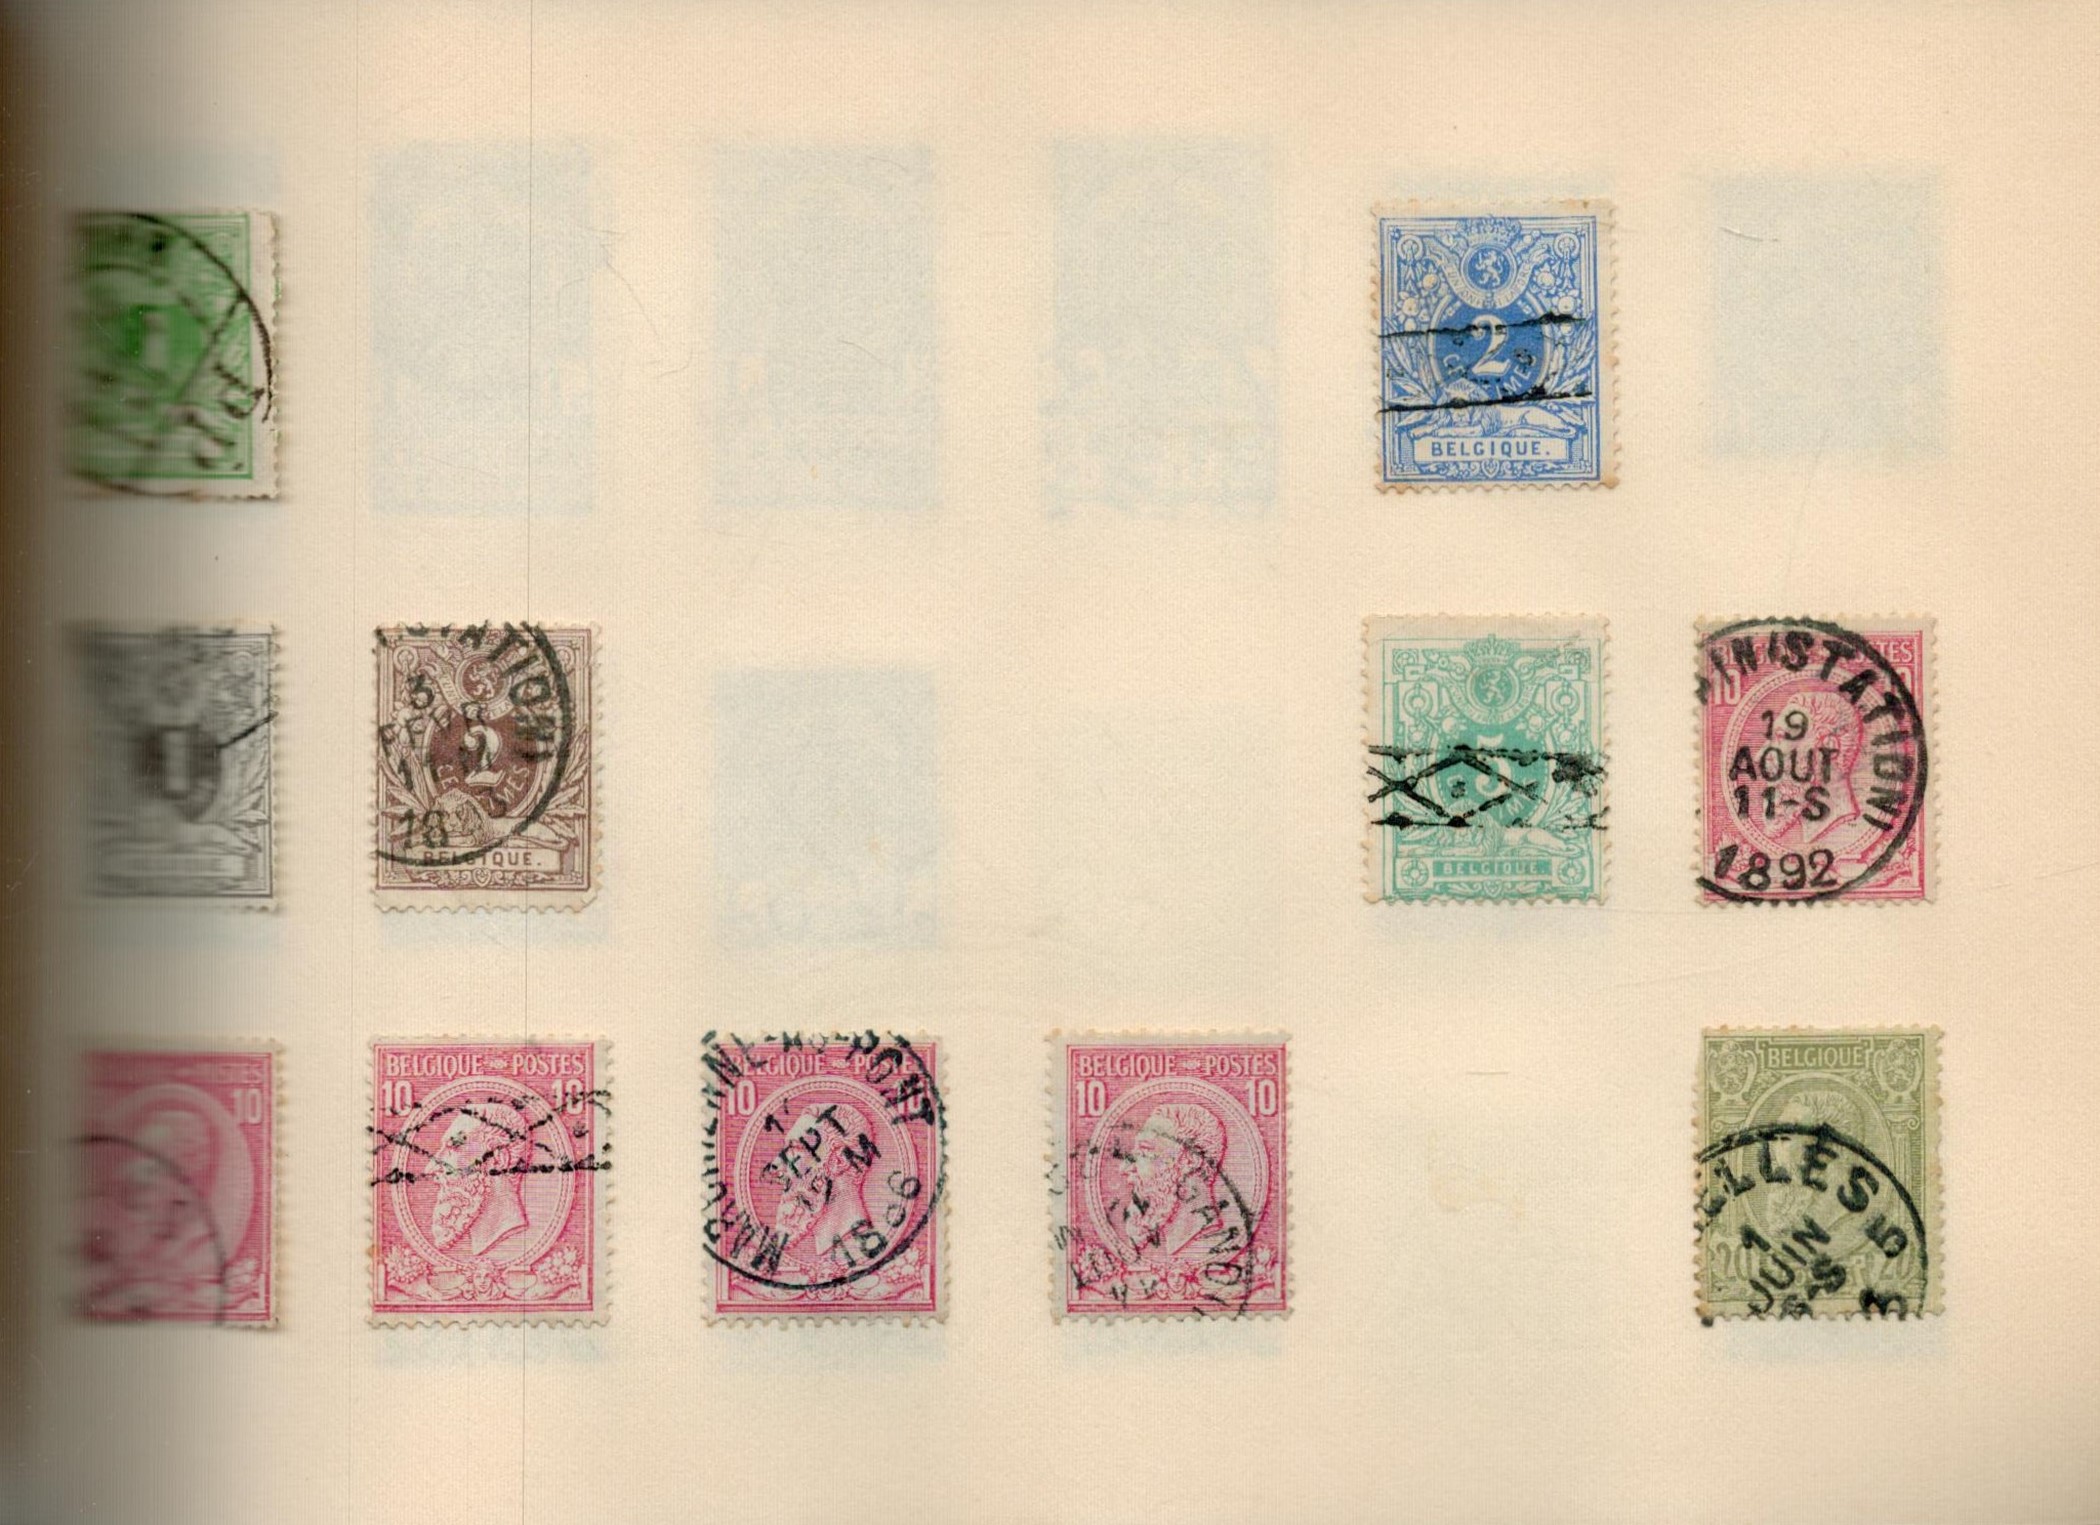 Worldwide Stamps in a Twinlock Crown Loose Leaf Binder countries include Argentina, Belgium, Brazil, - Image 2 of 4